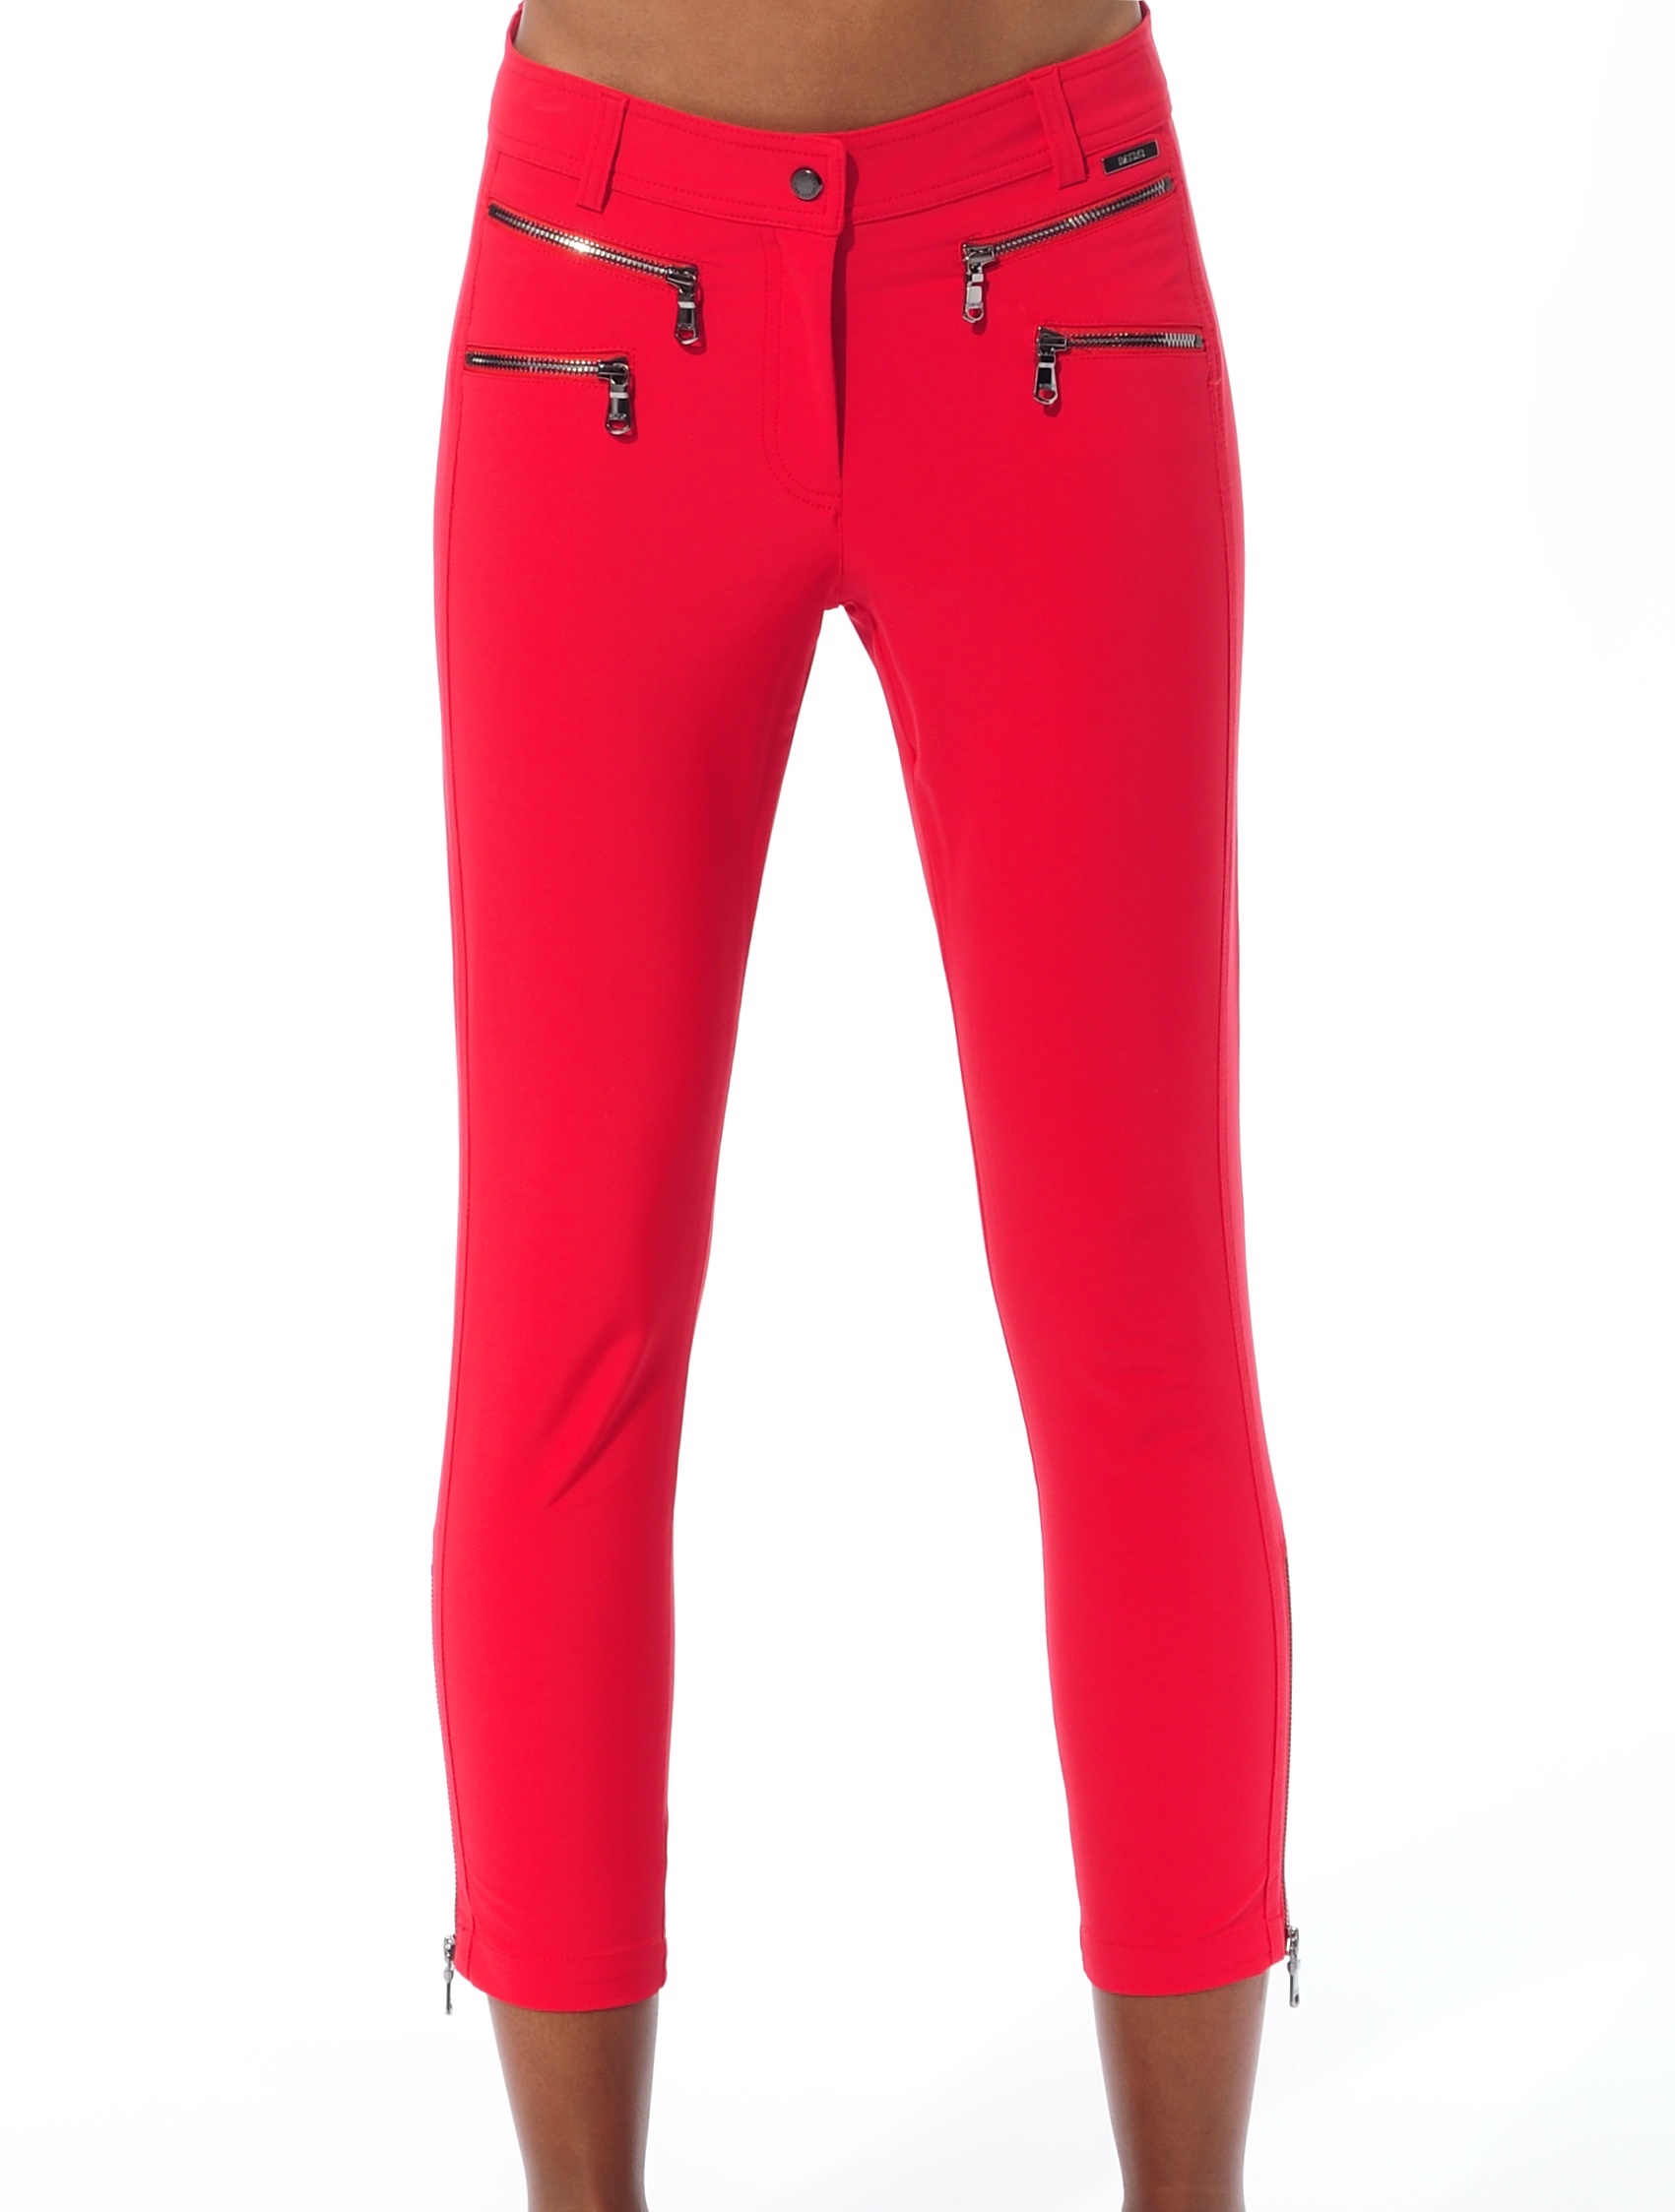 4way stretch double zip cropped pants red 